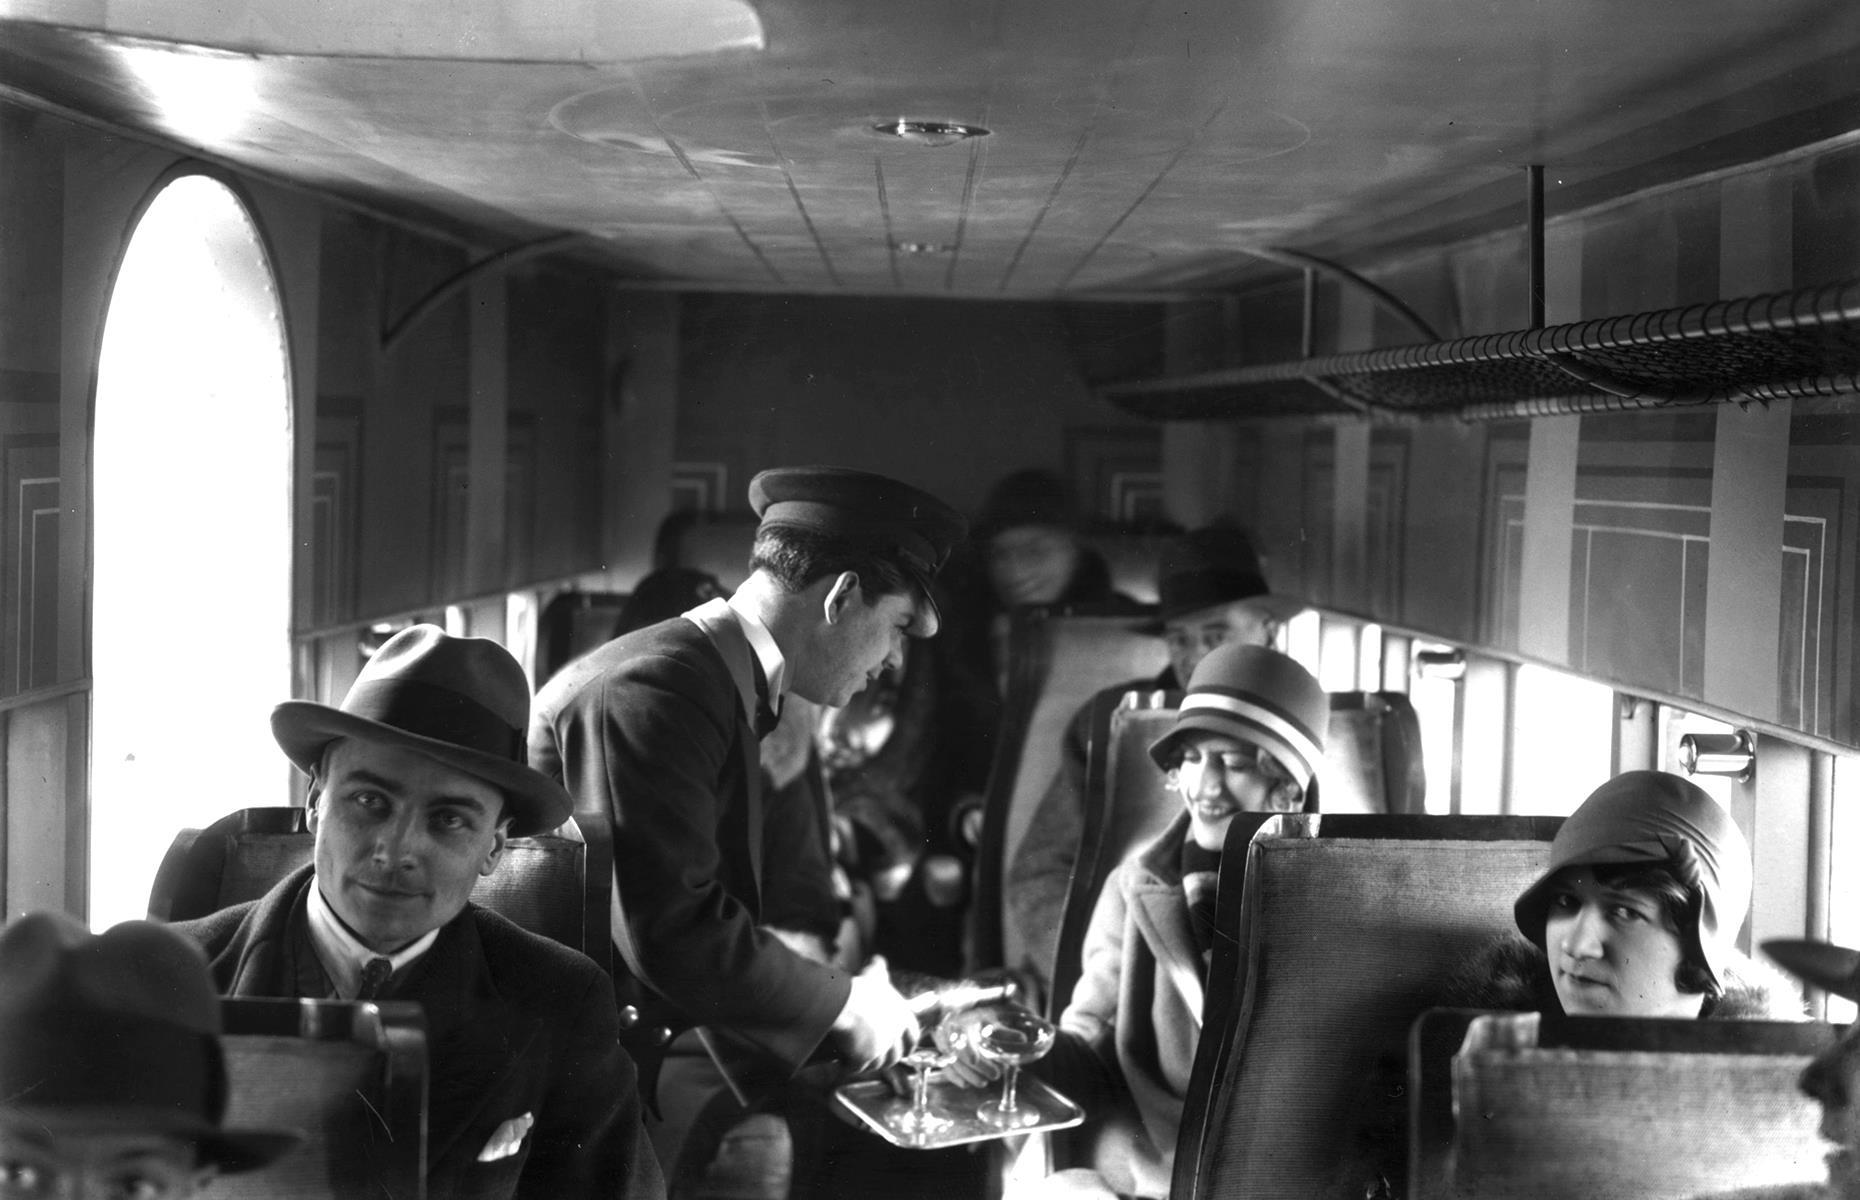 Slide 5 of 51: Life on board a 1920s aircraft was very different from that of the modern day. Flights were a lavish affair reserved only for the richest members of society. Passengers had their every need attended to and were waited on with fine food and drink. However, the ride itself wouldn't have been so comfortable. Planes traveled at a much lower altitude, so passengers were subjected to lots of noise, turbulence and long journey times.